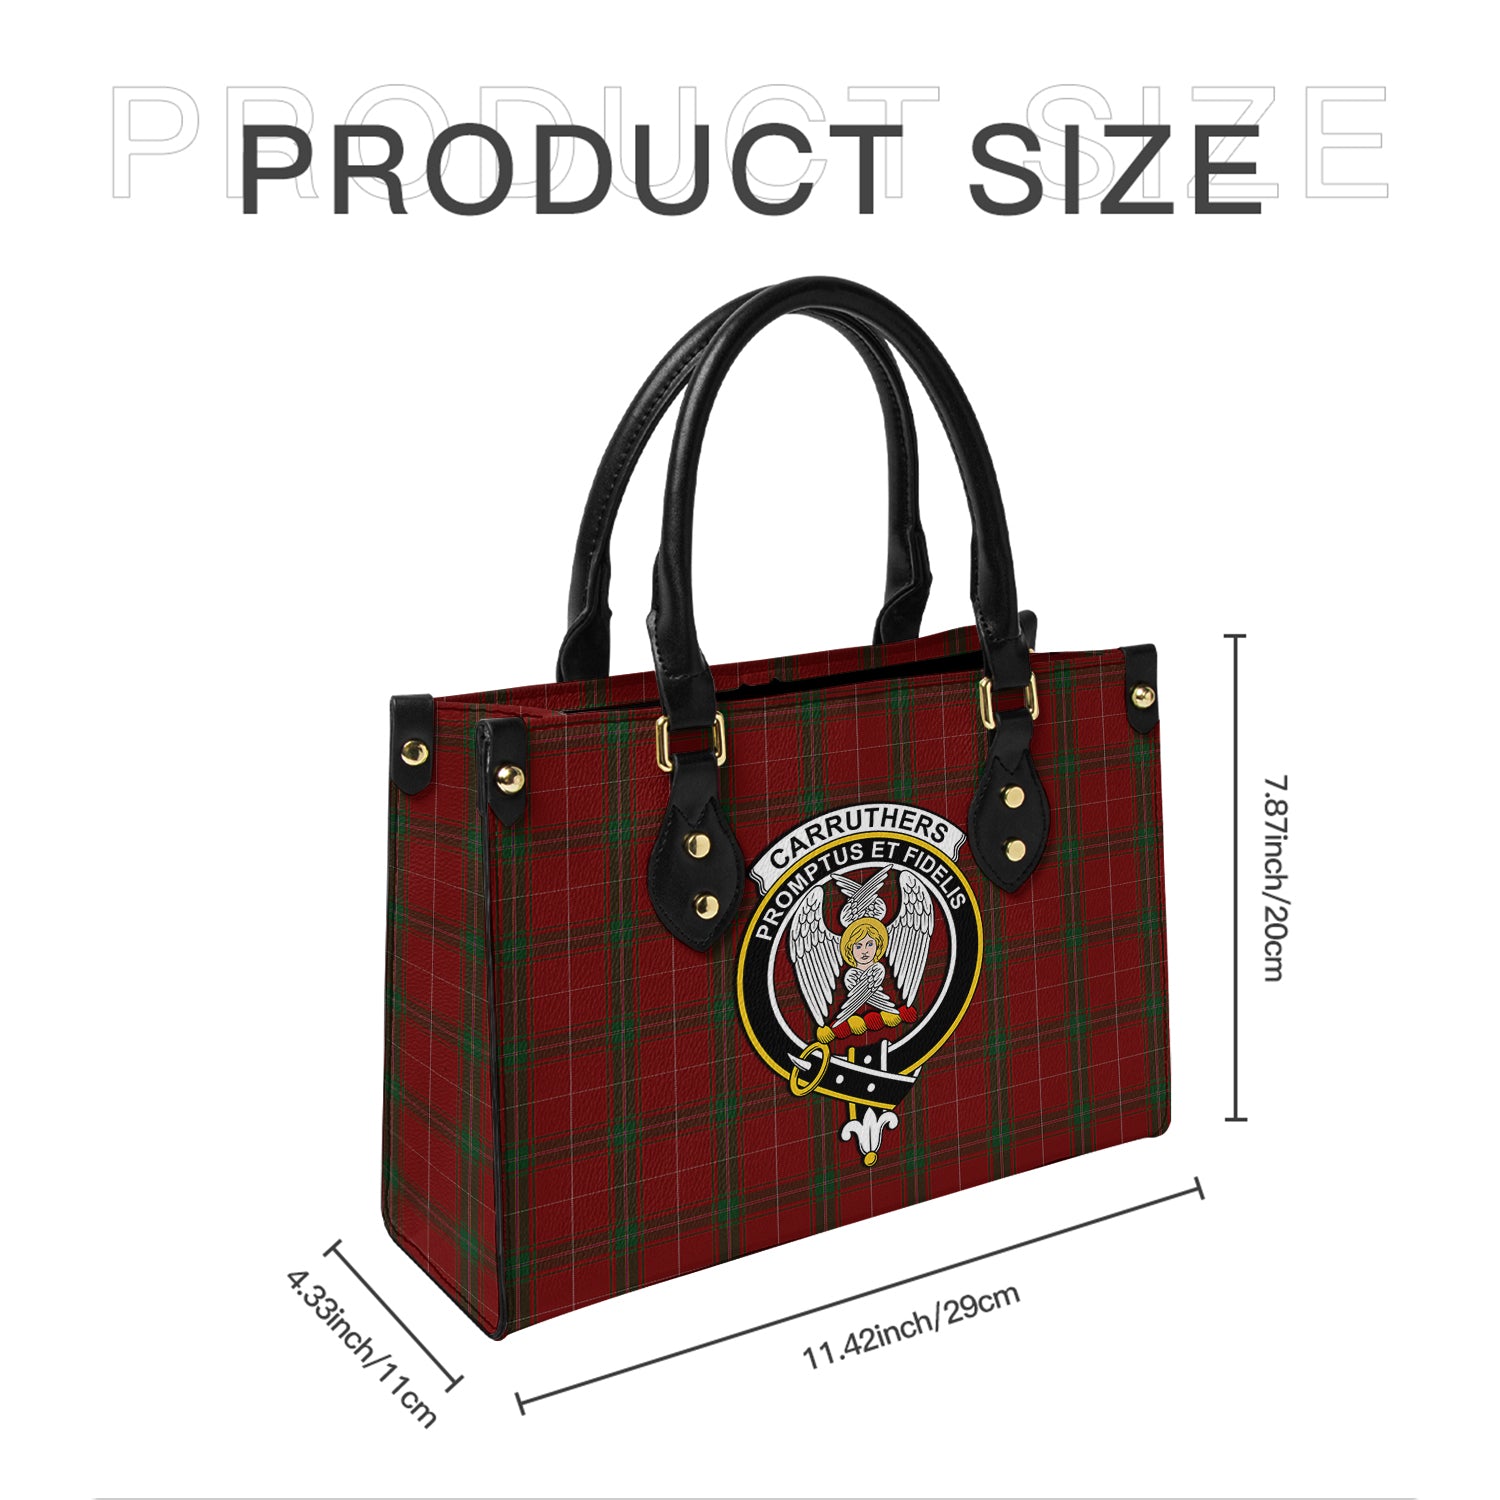 carruthers-tartan-leather-bag-with-family-crest